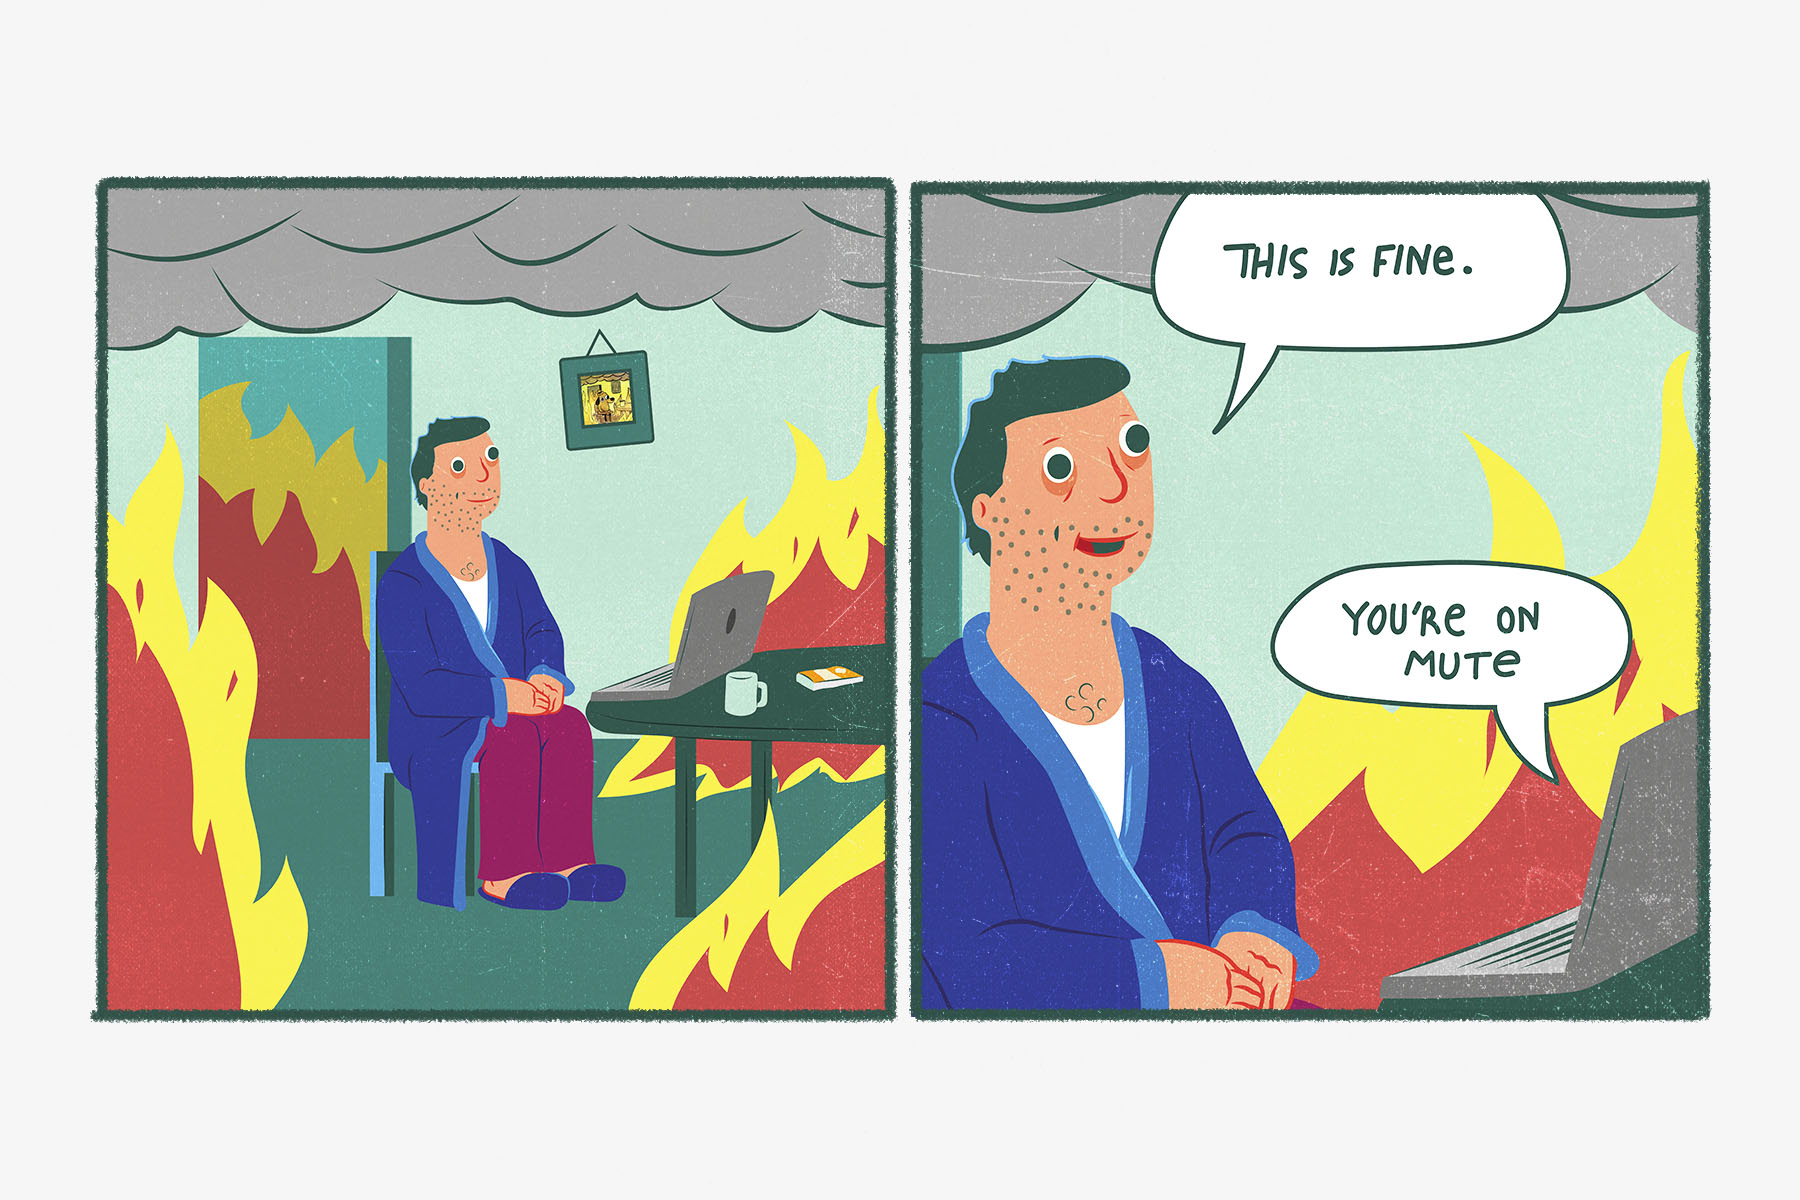 An illustration of a man 'burning out' at his work-from-home desk, parodying the popular 'This is fine' meme.